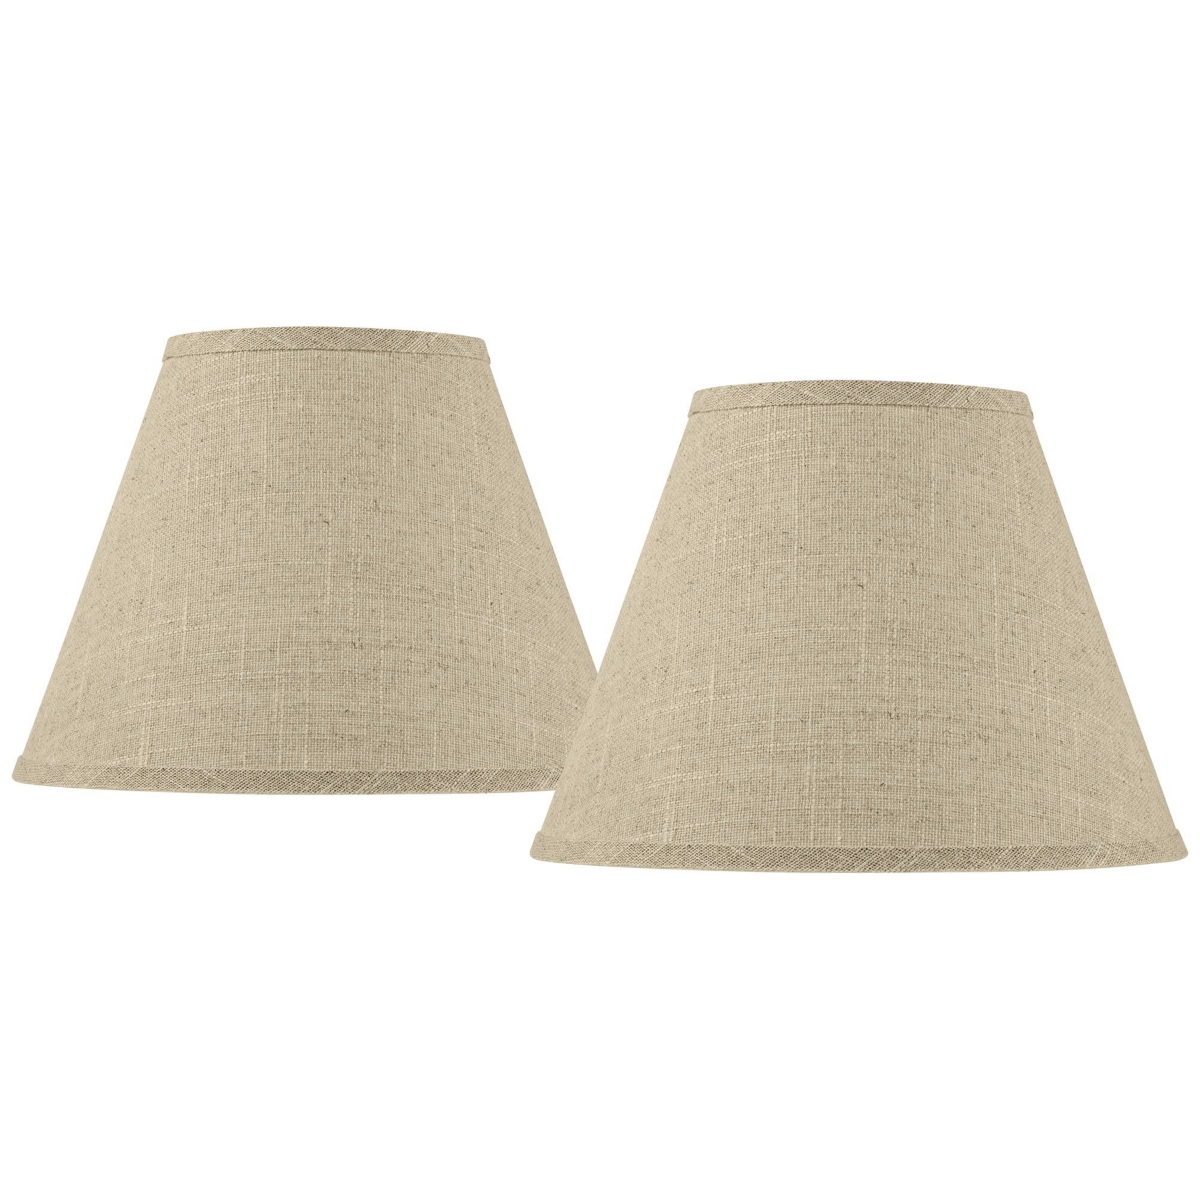 Springcrest Set Of 2 Empire Lamp Shades Fine Burlap Small 6" Top X 12" Bottom X 9" Slant Spider With Replacement In Brown